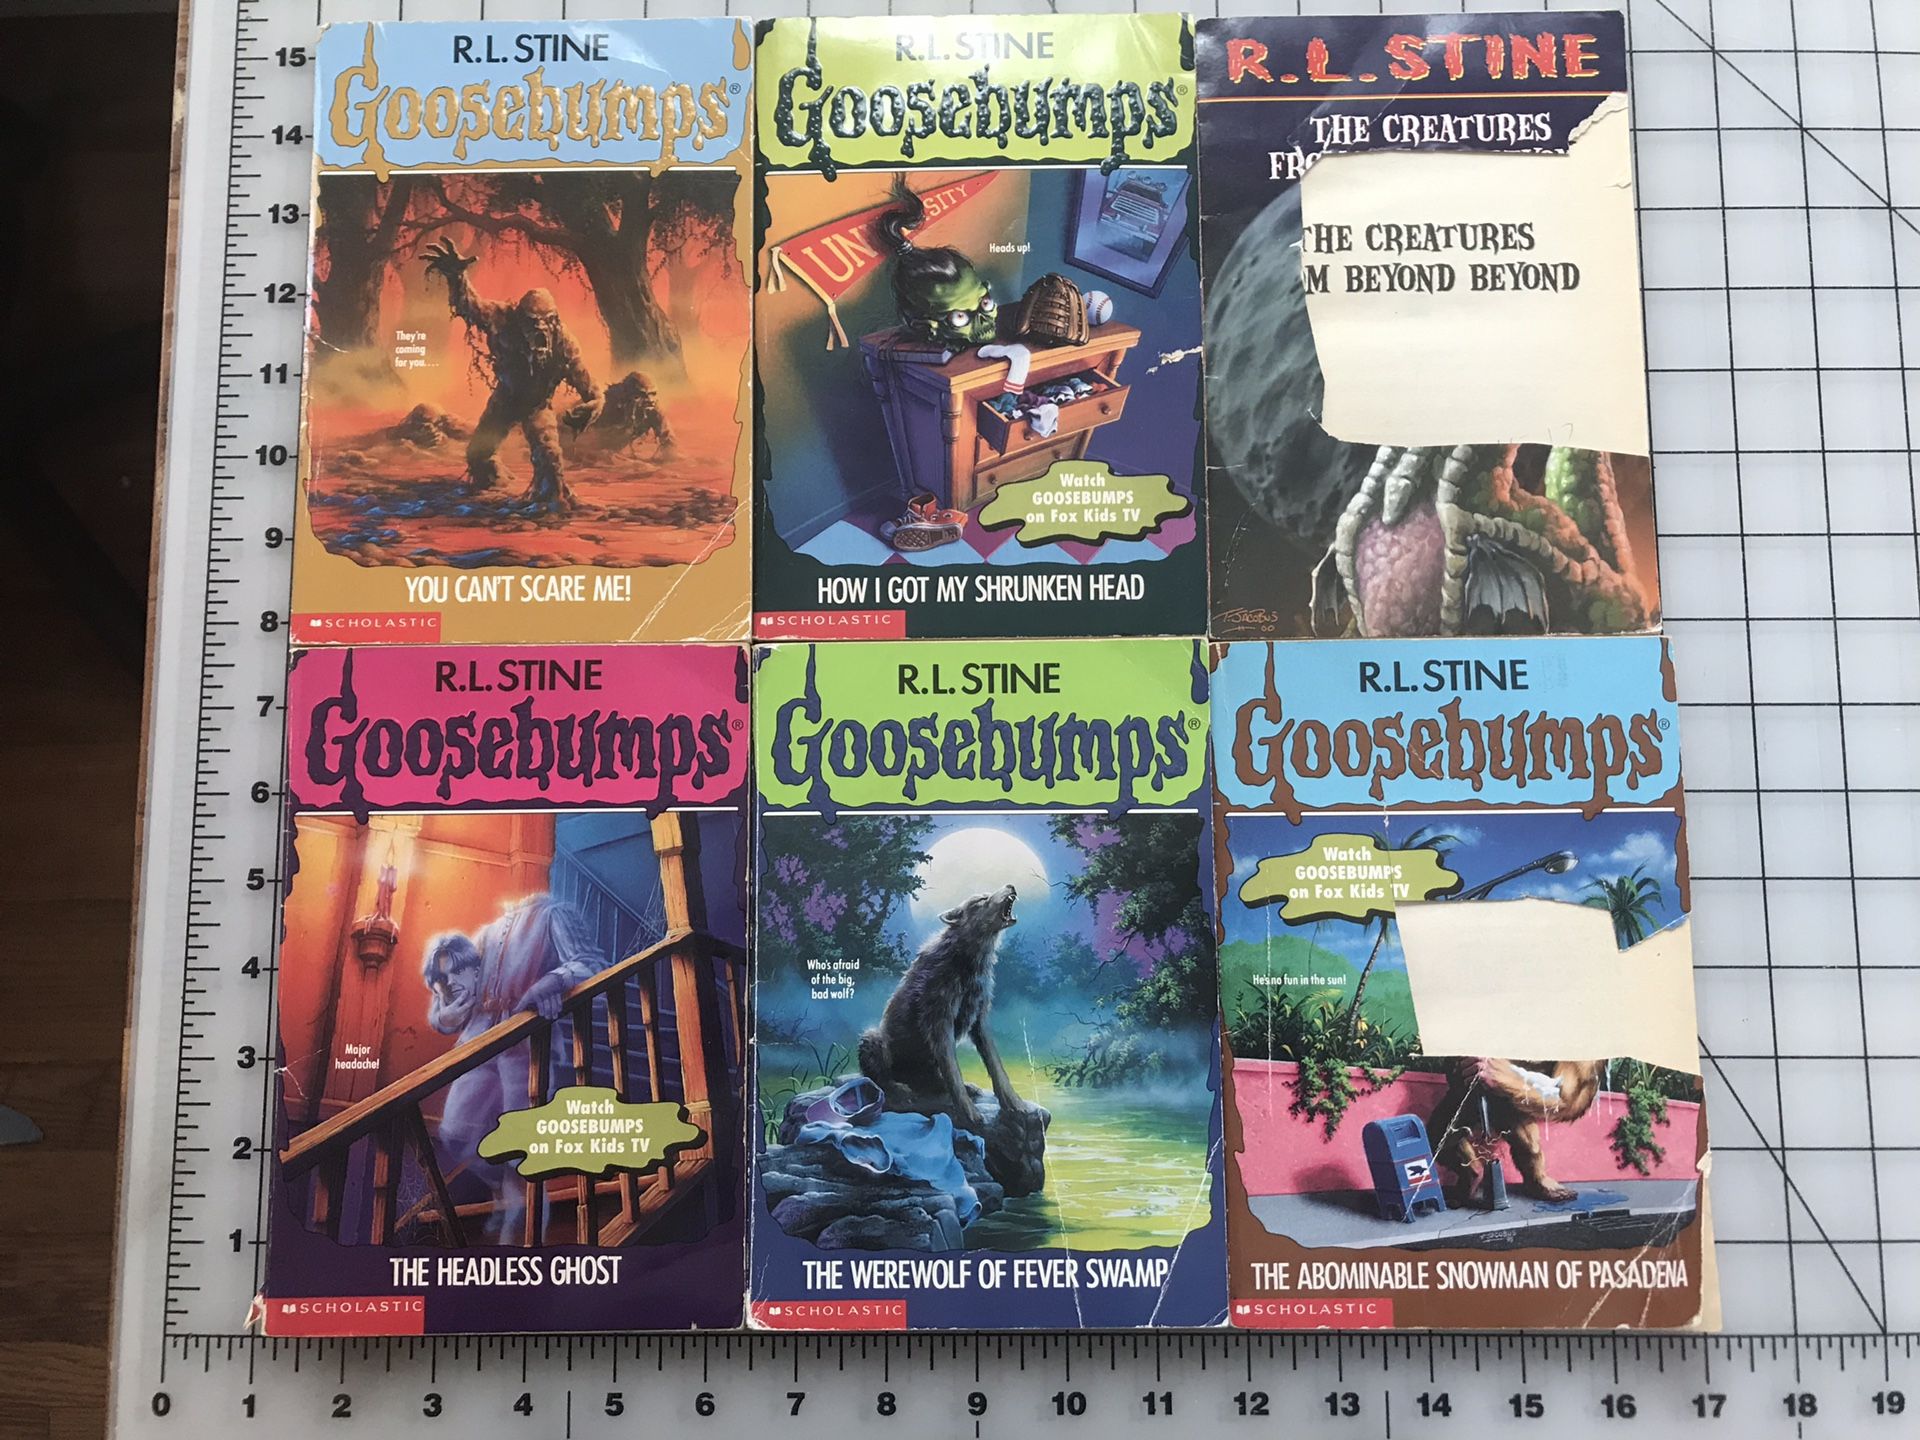 R.L. Stine Goosebumps series (all free with a purchase)